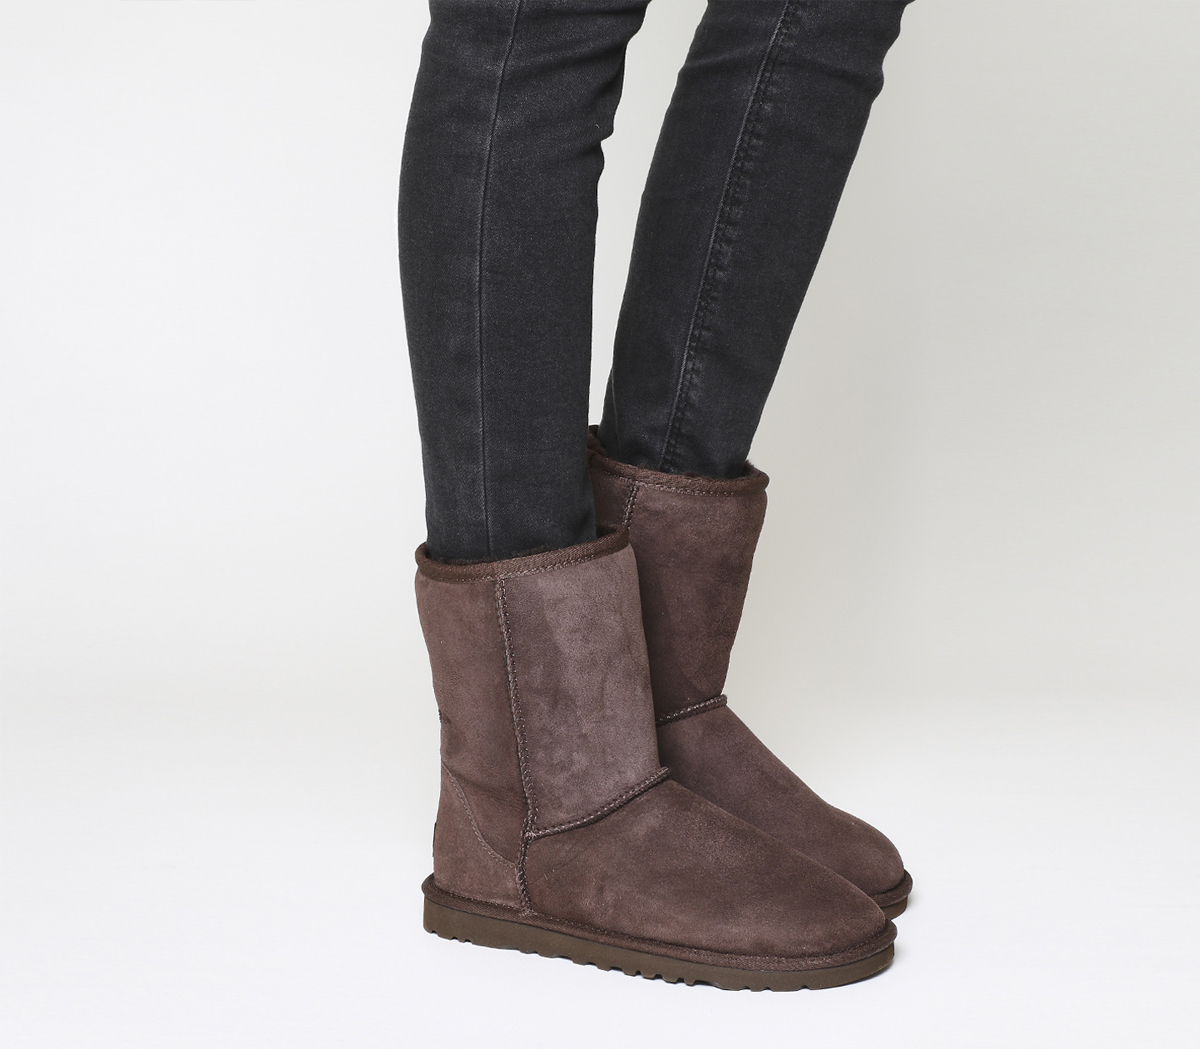 Chocolate Ugg Boots Italy, SAVE 37% - mpgc.net